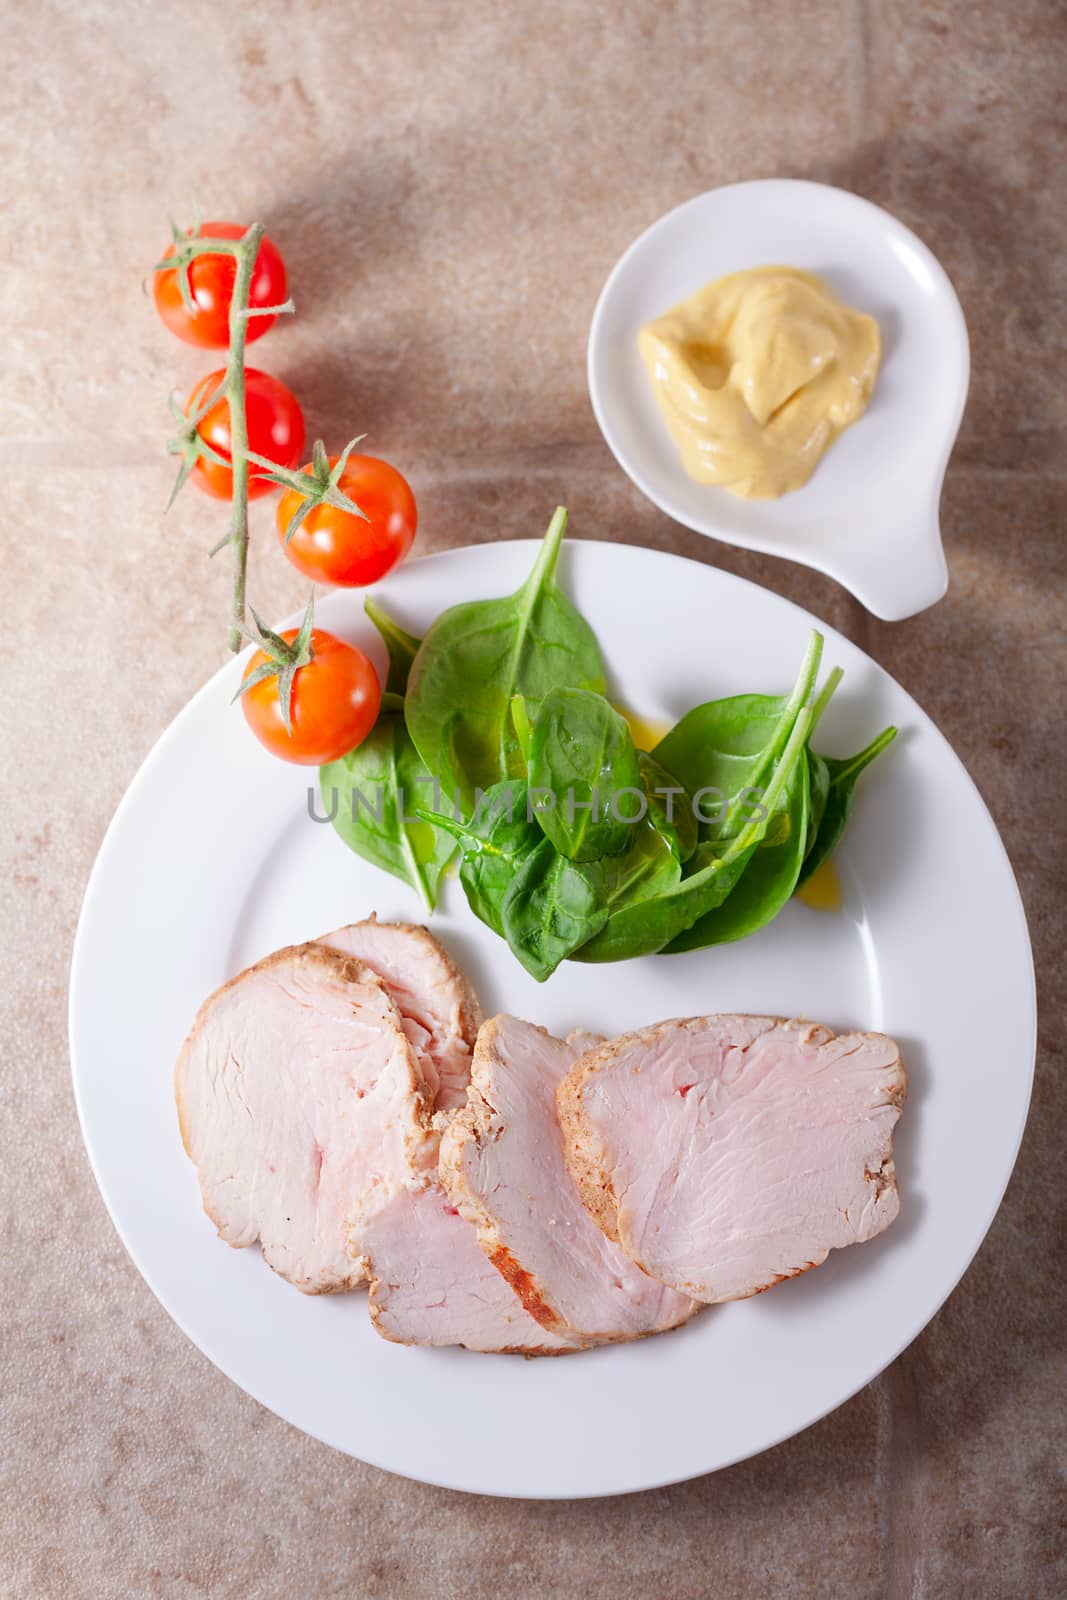 Turkey breast with green salad by supercat67